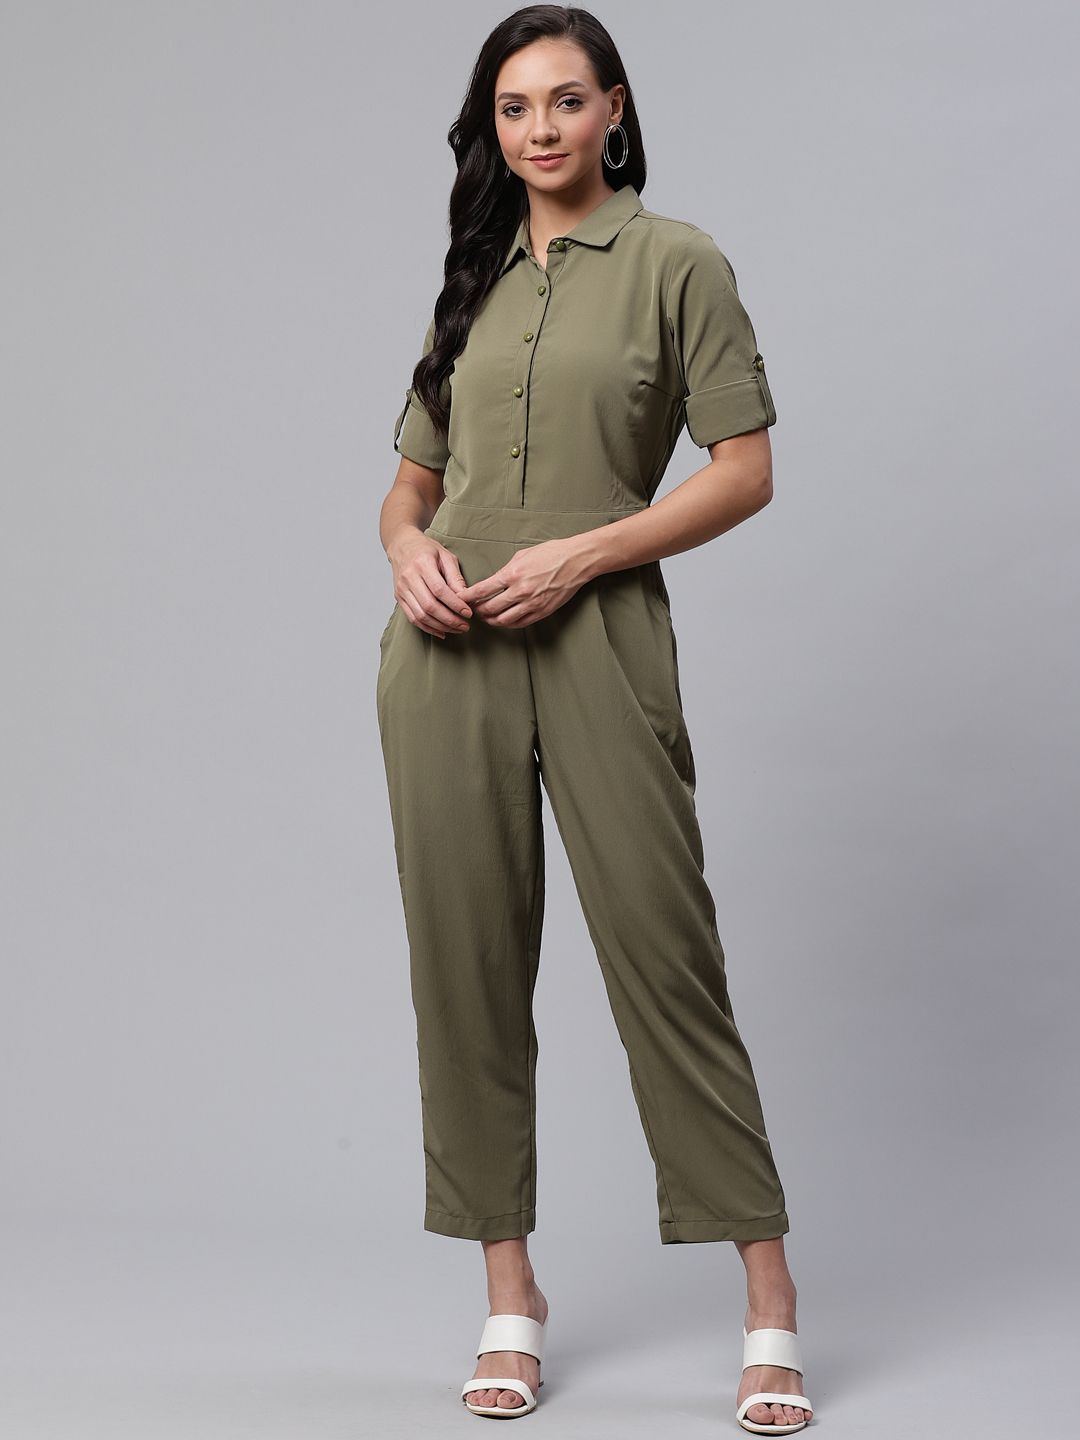 Deewa Women Olive Green Solid Basic Jumpsuit Price in India